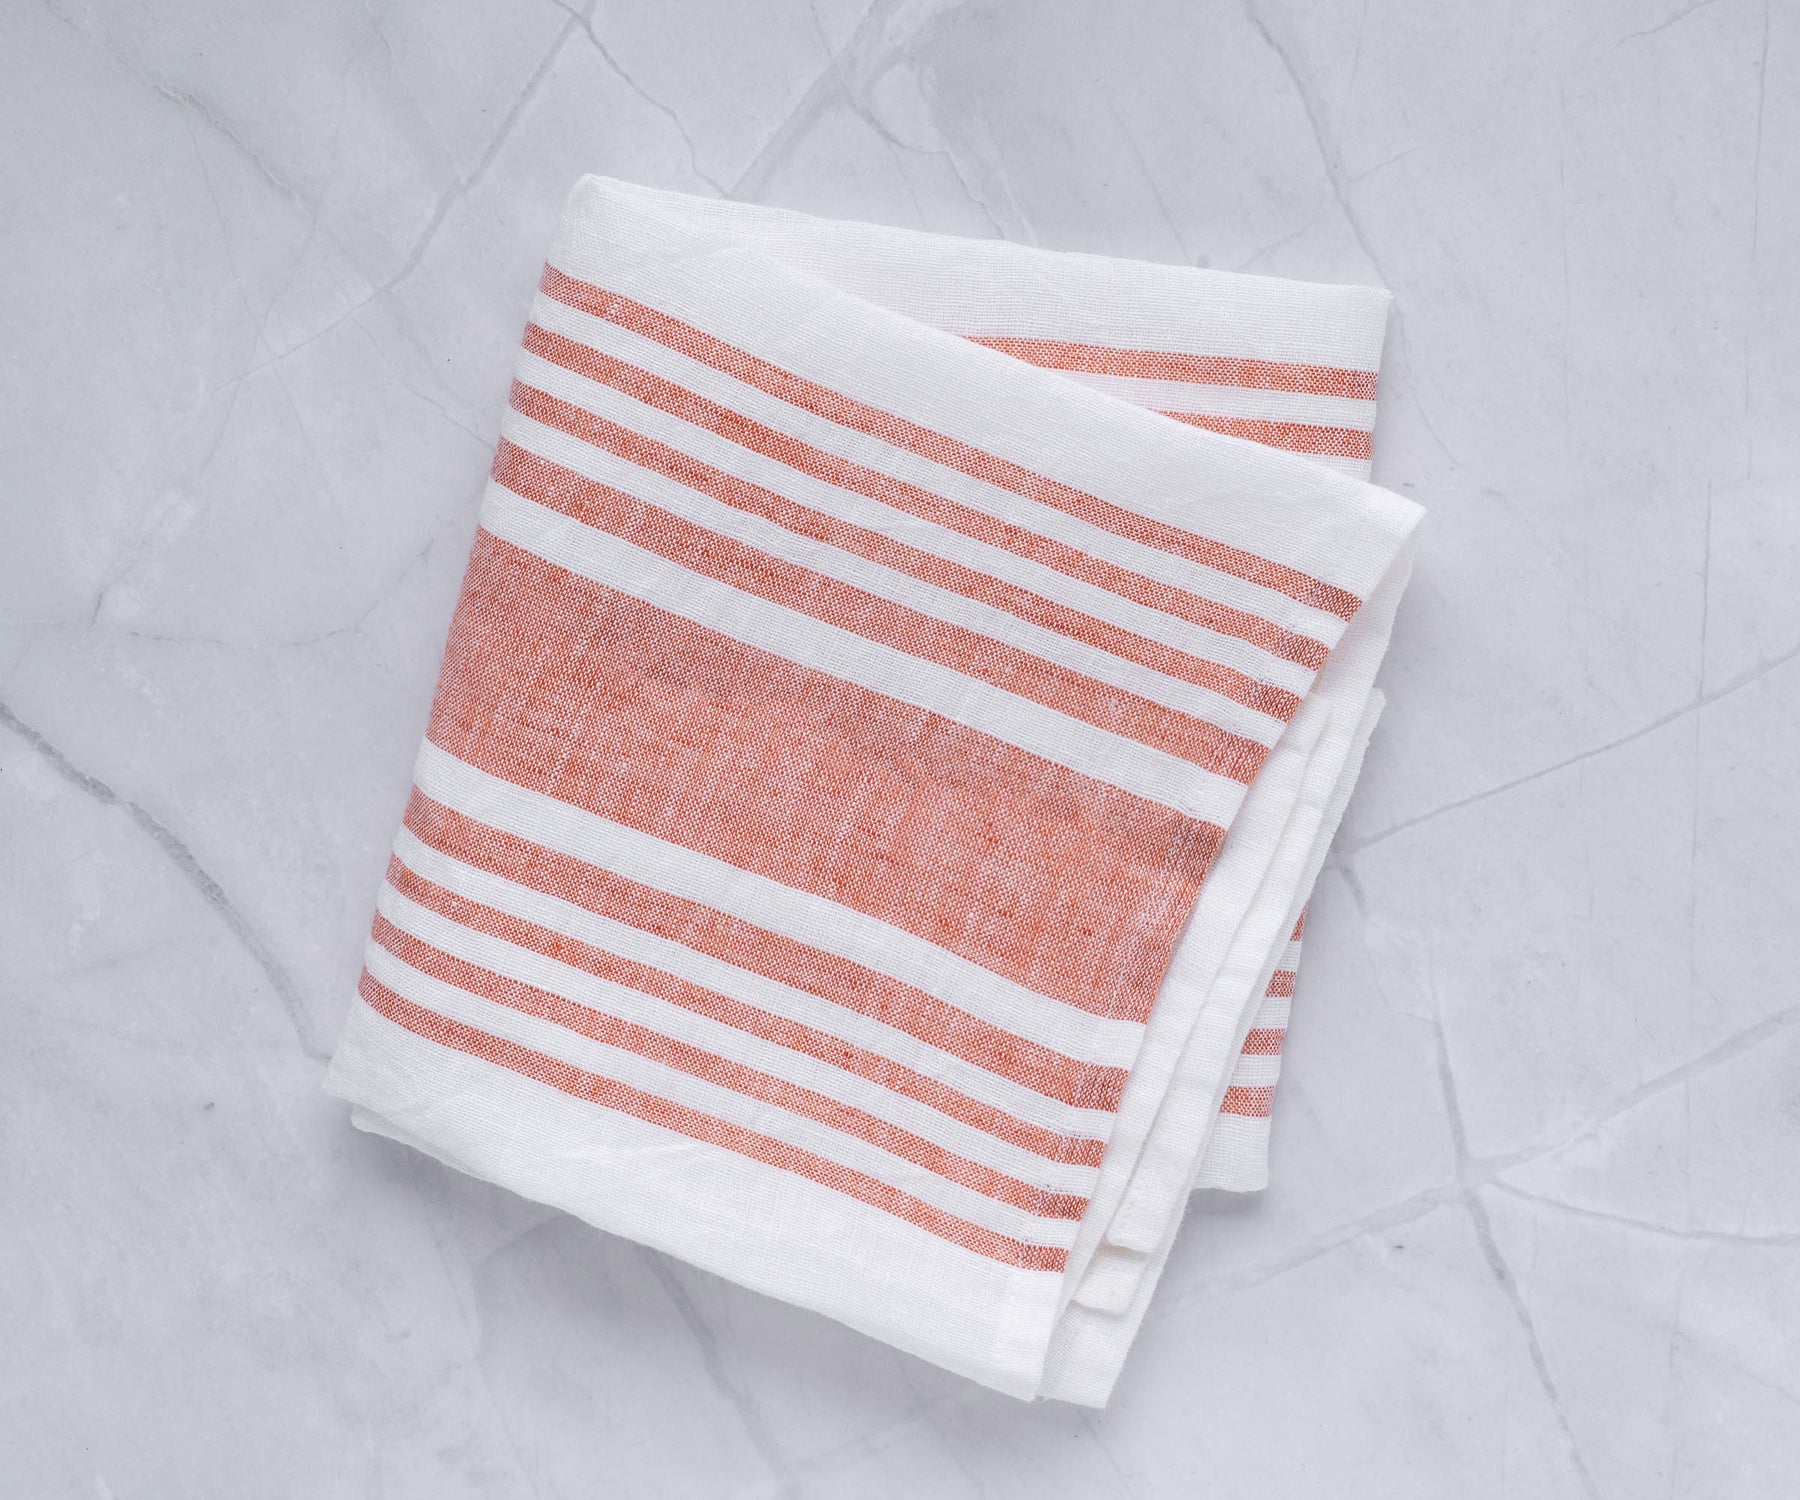 Experience the sheer beauty and unparalleled functionality of linen kitchen towels and dish towels, a perfect marriage of style and practicality for your kitchen.